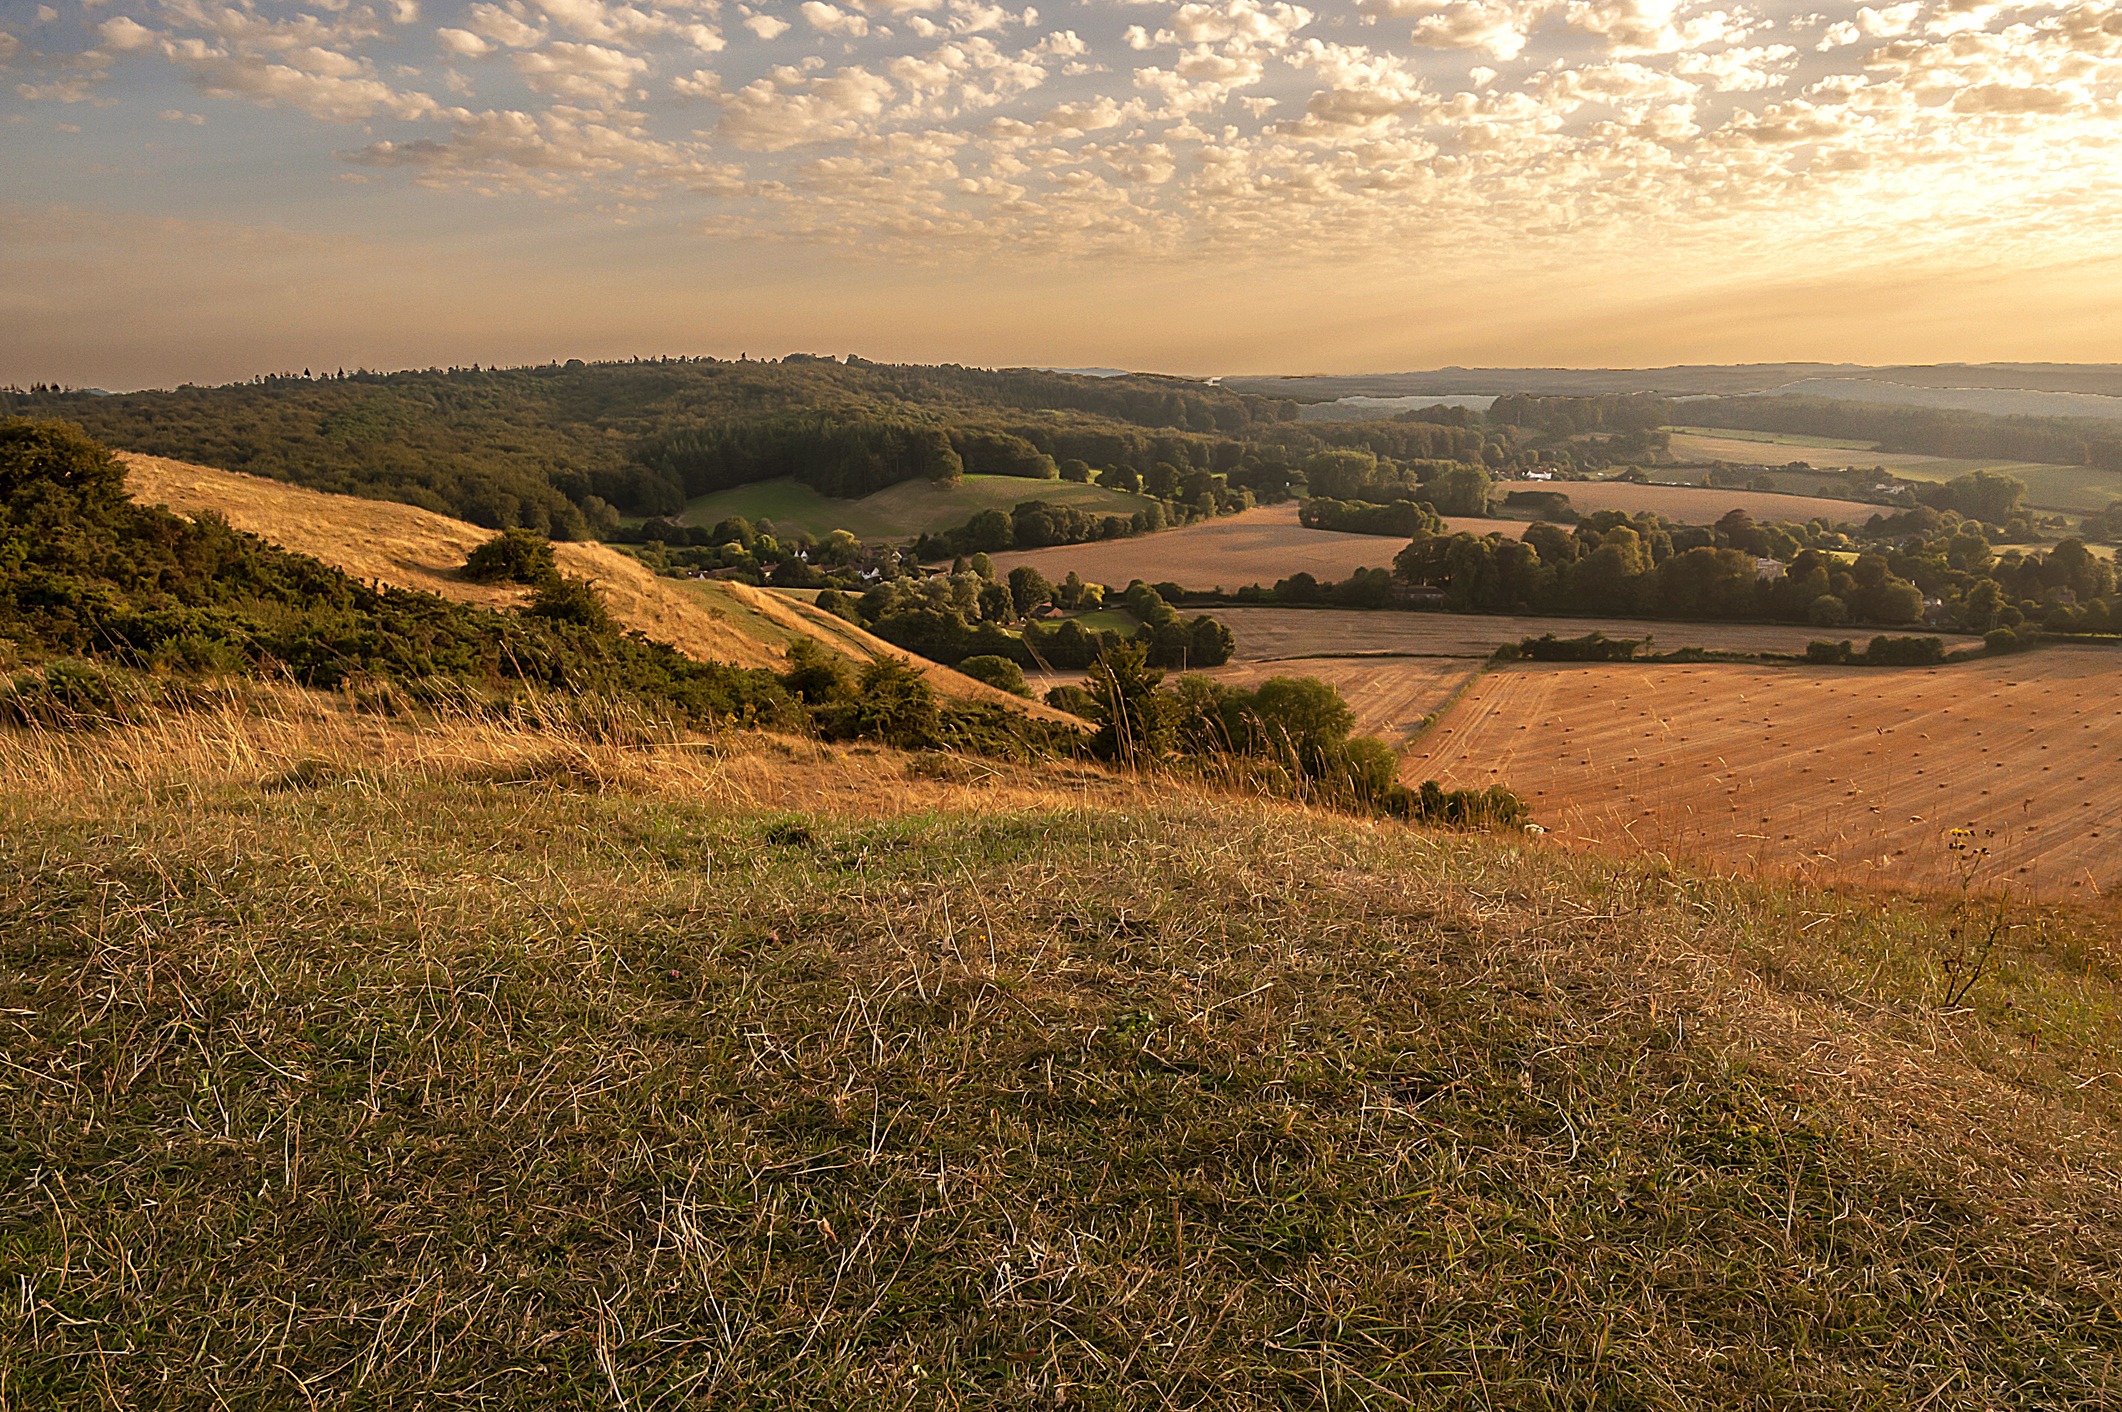 Cley Hill, Wiltshire